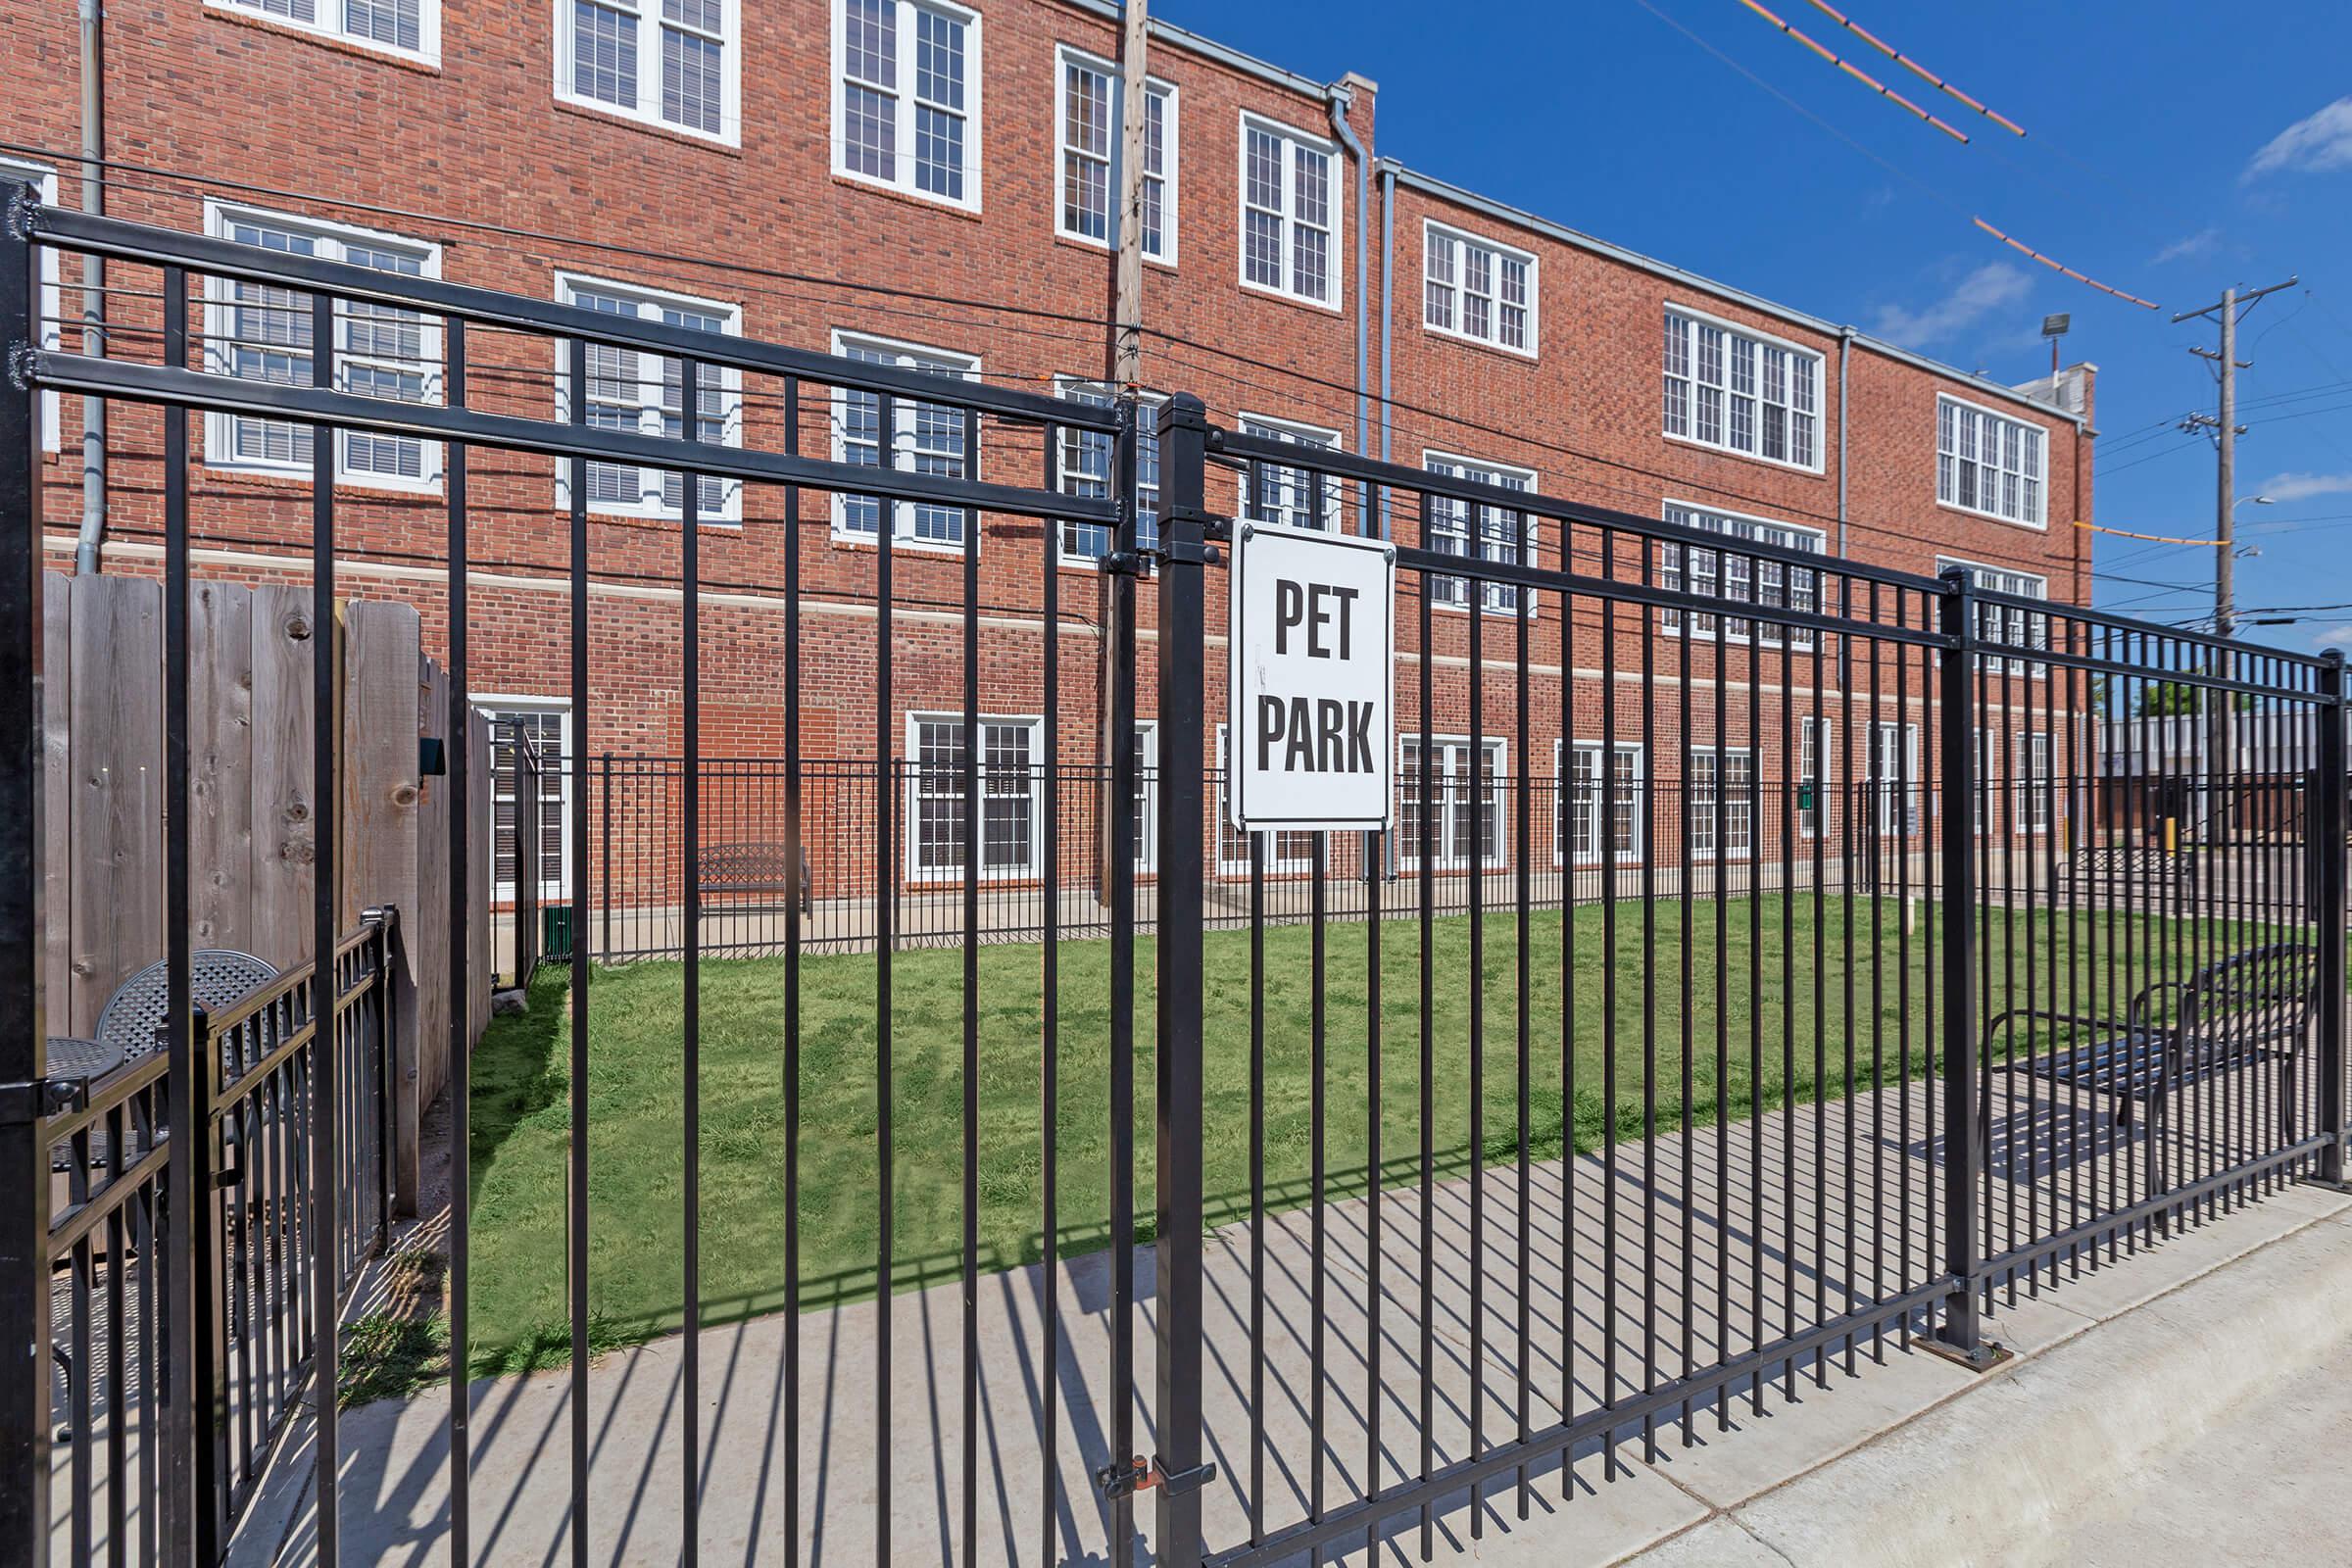 a brick building with a metal fence